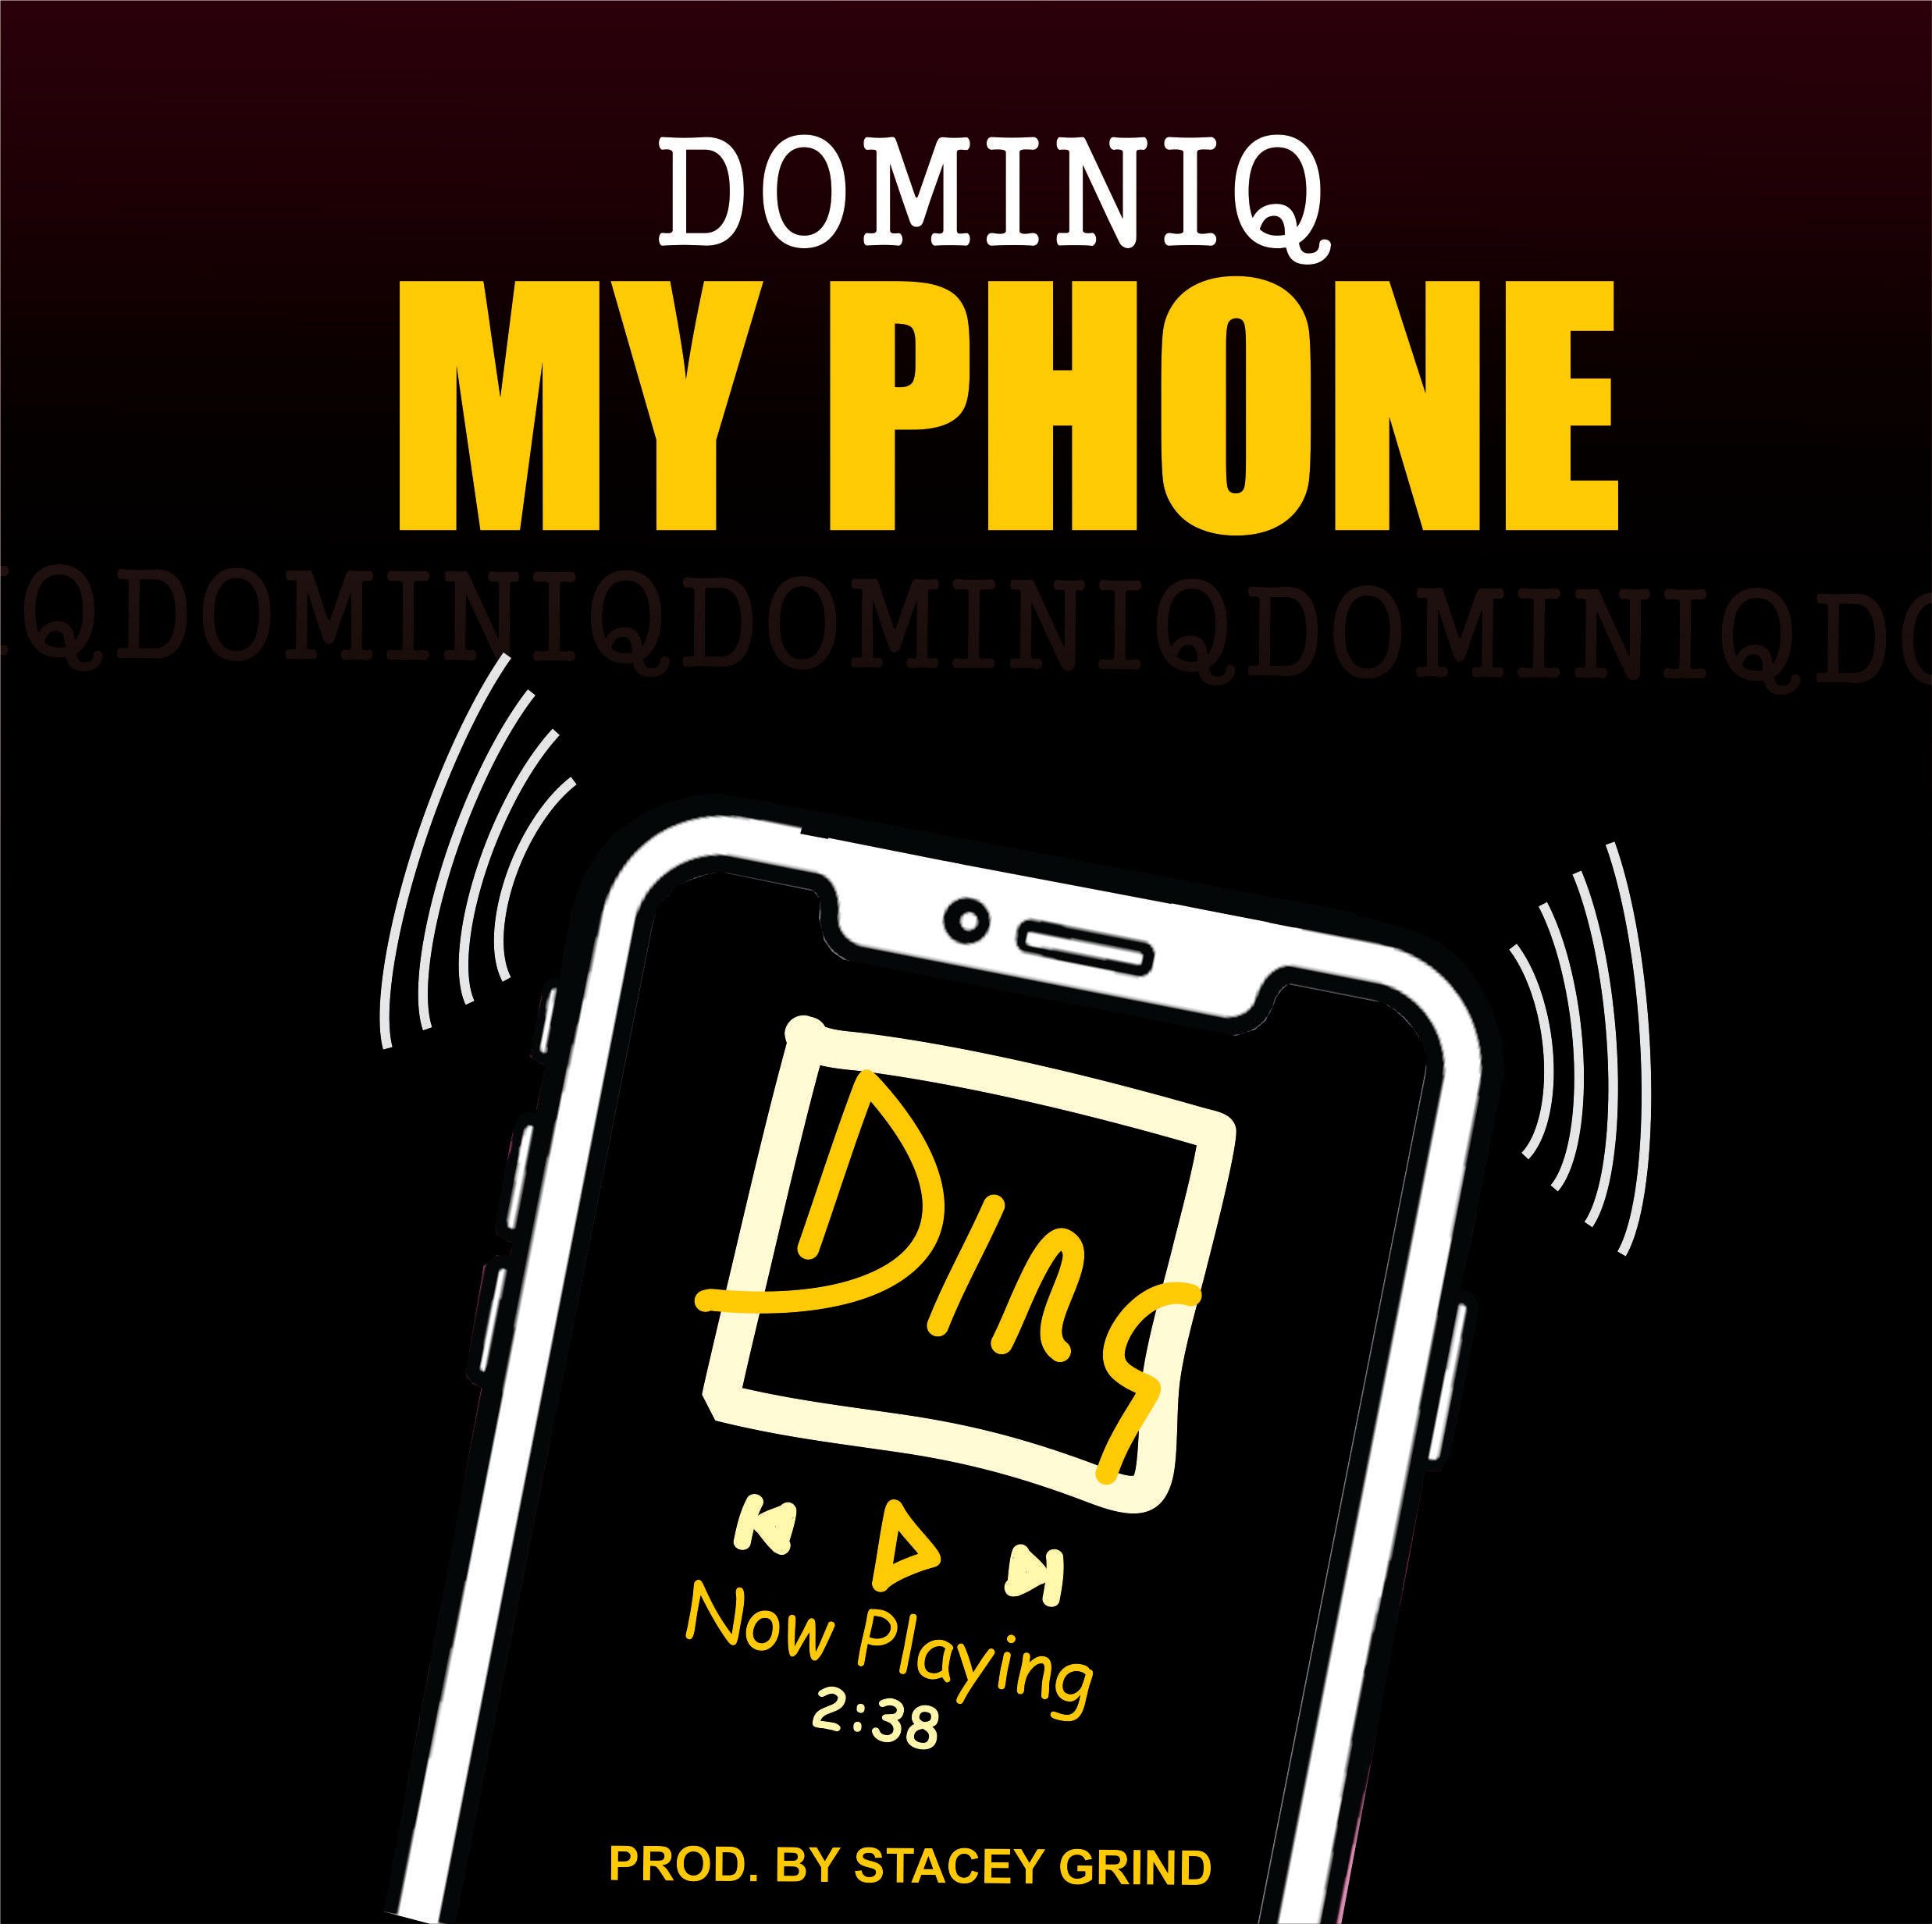 Dominiq — Phone (Prod. by Stacey Grind)